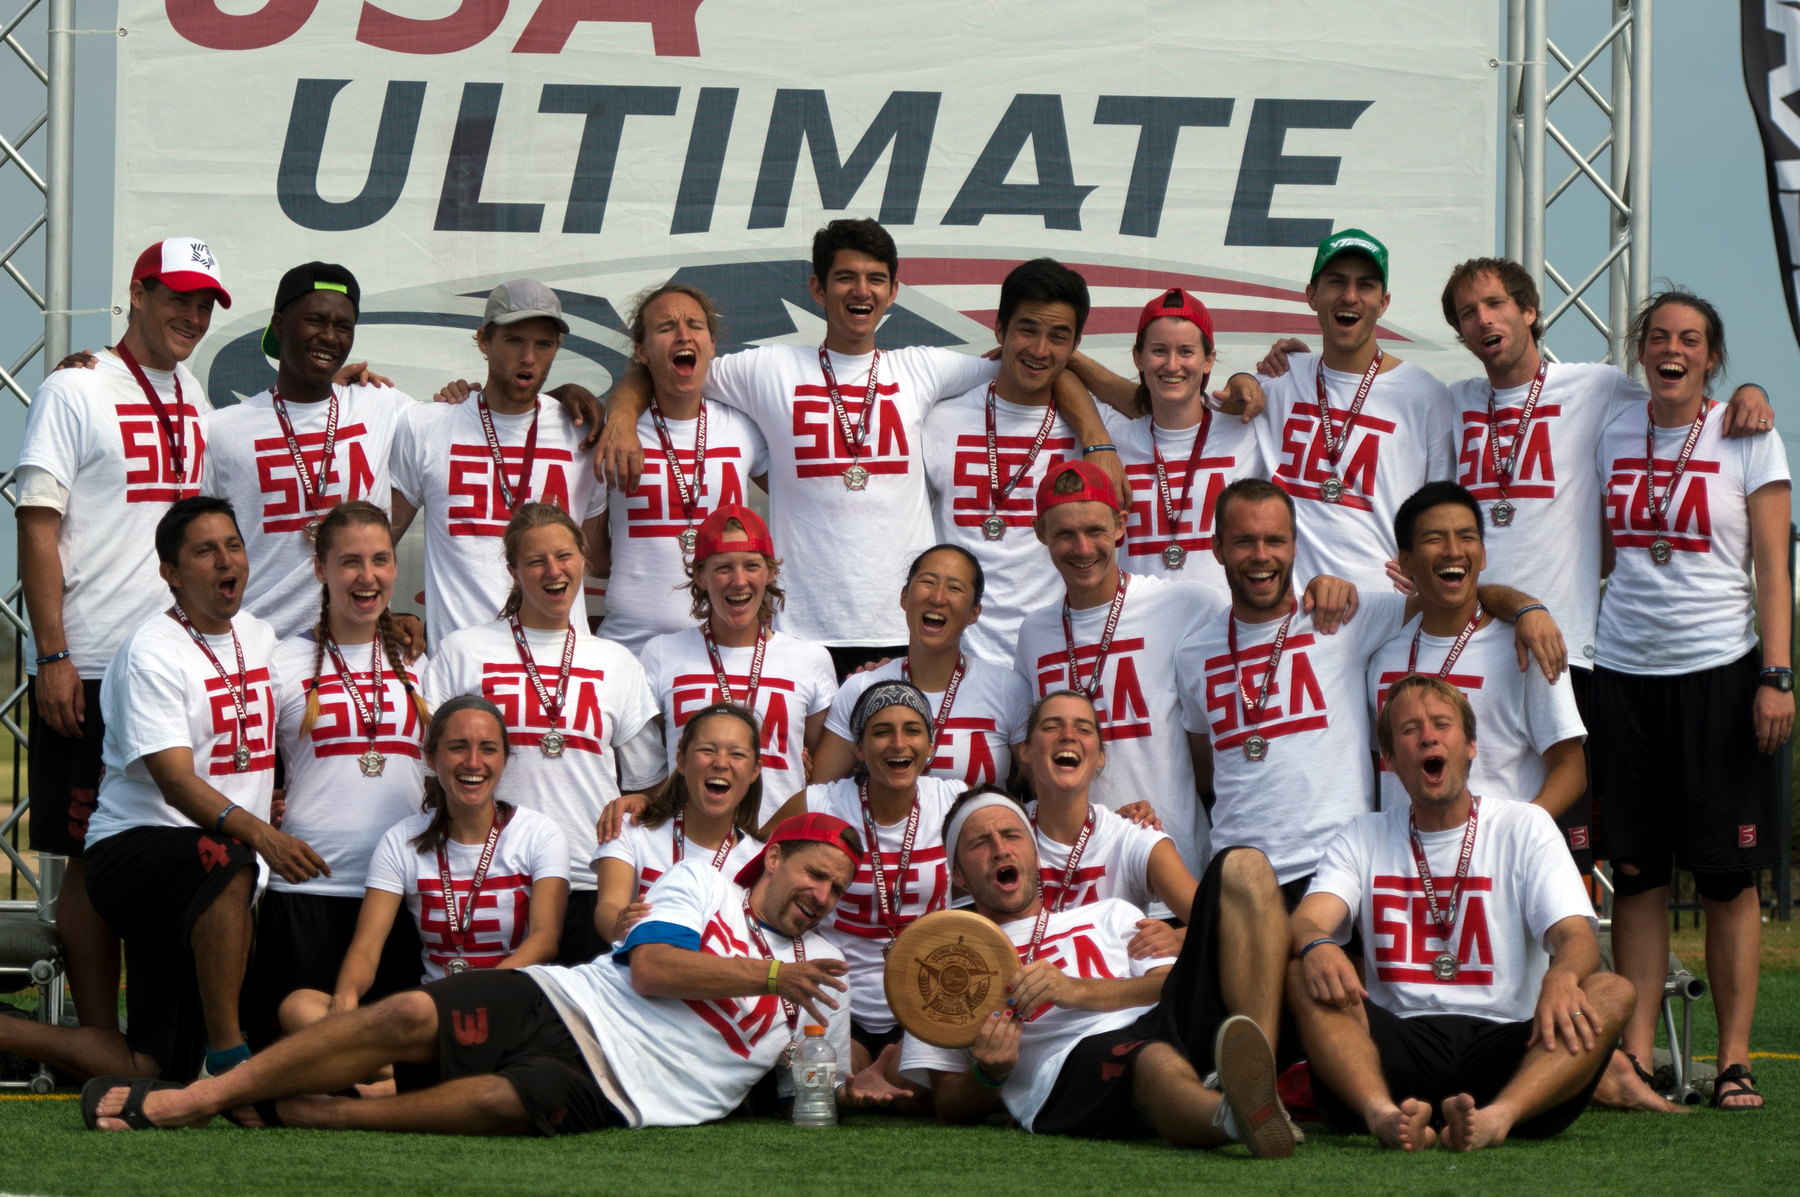 Seattle Mixed (aka the Ghetto Birds) take 2nd place in the Mixed Division of the USA Club Championships. (Jolie Lang - UltiPhotos.com)